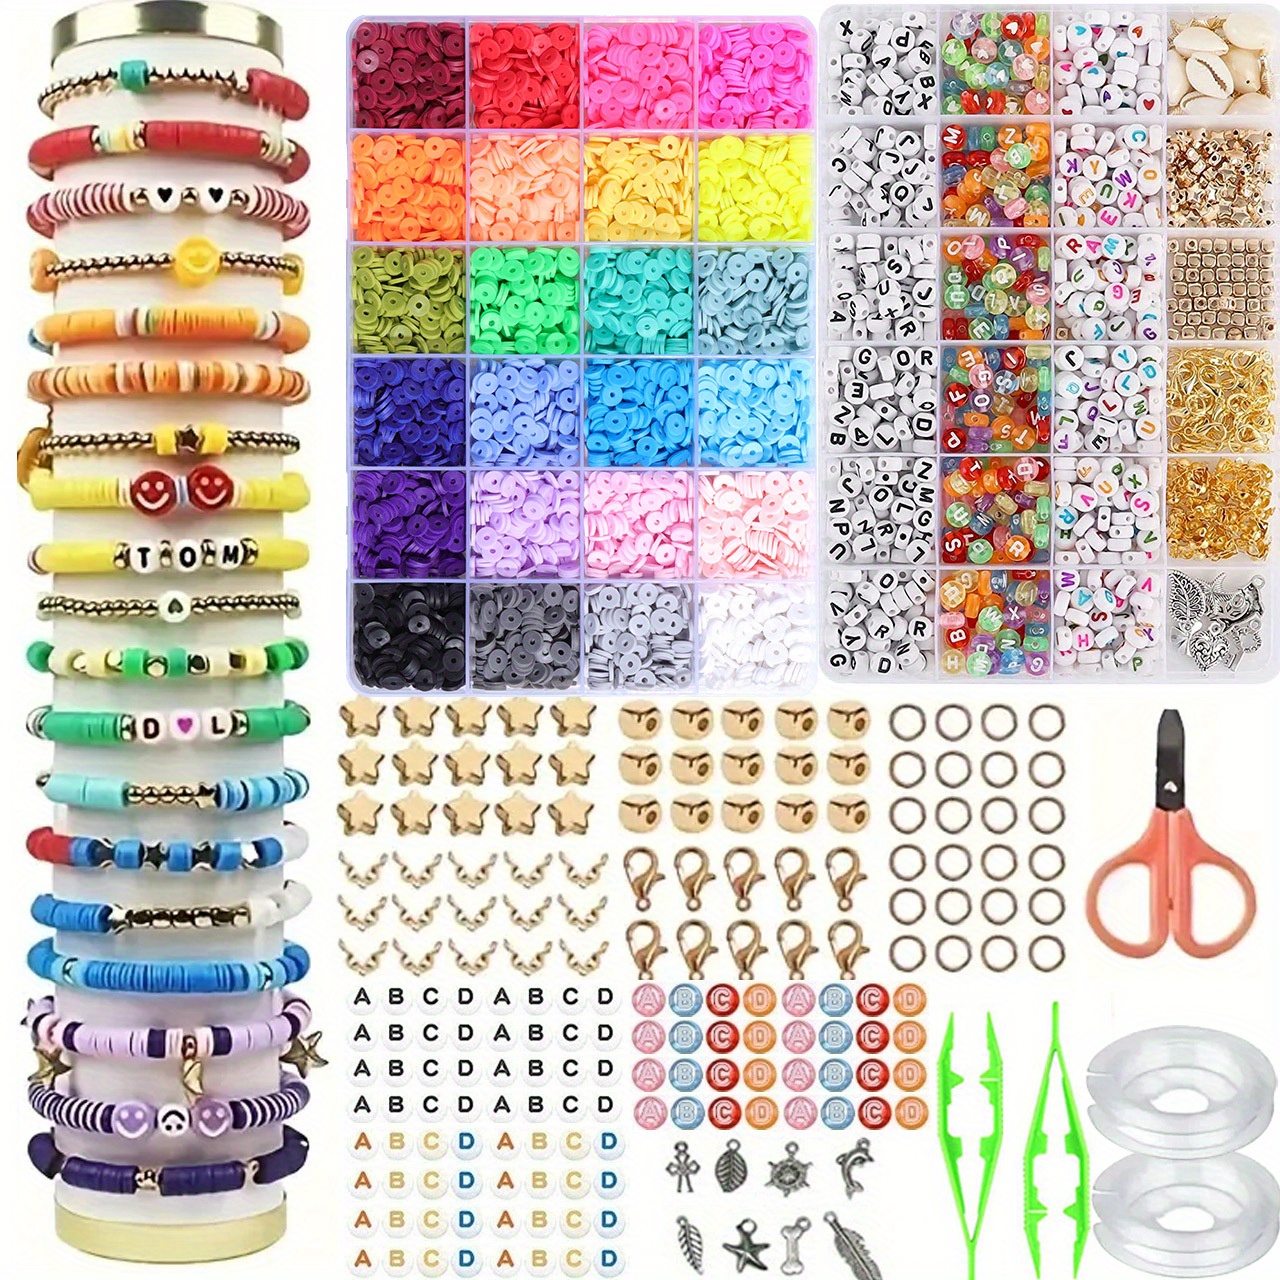 

1pack Colorful Polymer Clay Beads, 6mm Flat Round Slice Beads, With Storage Box, Includes Letter Beads, Charms, Elastic Strings & Accessories, For Making Necklace Jewelry